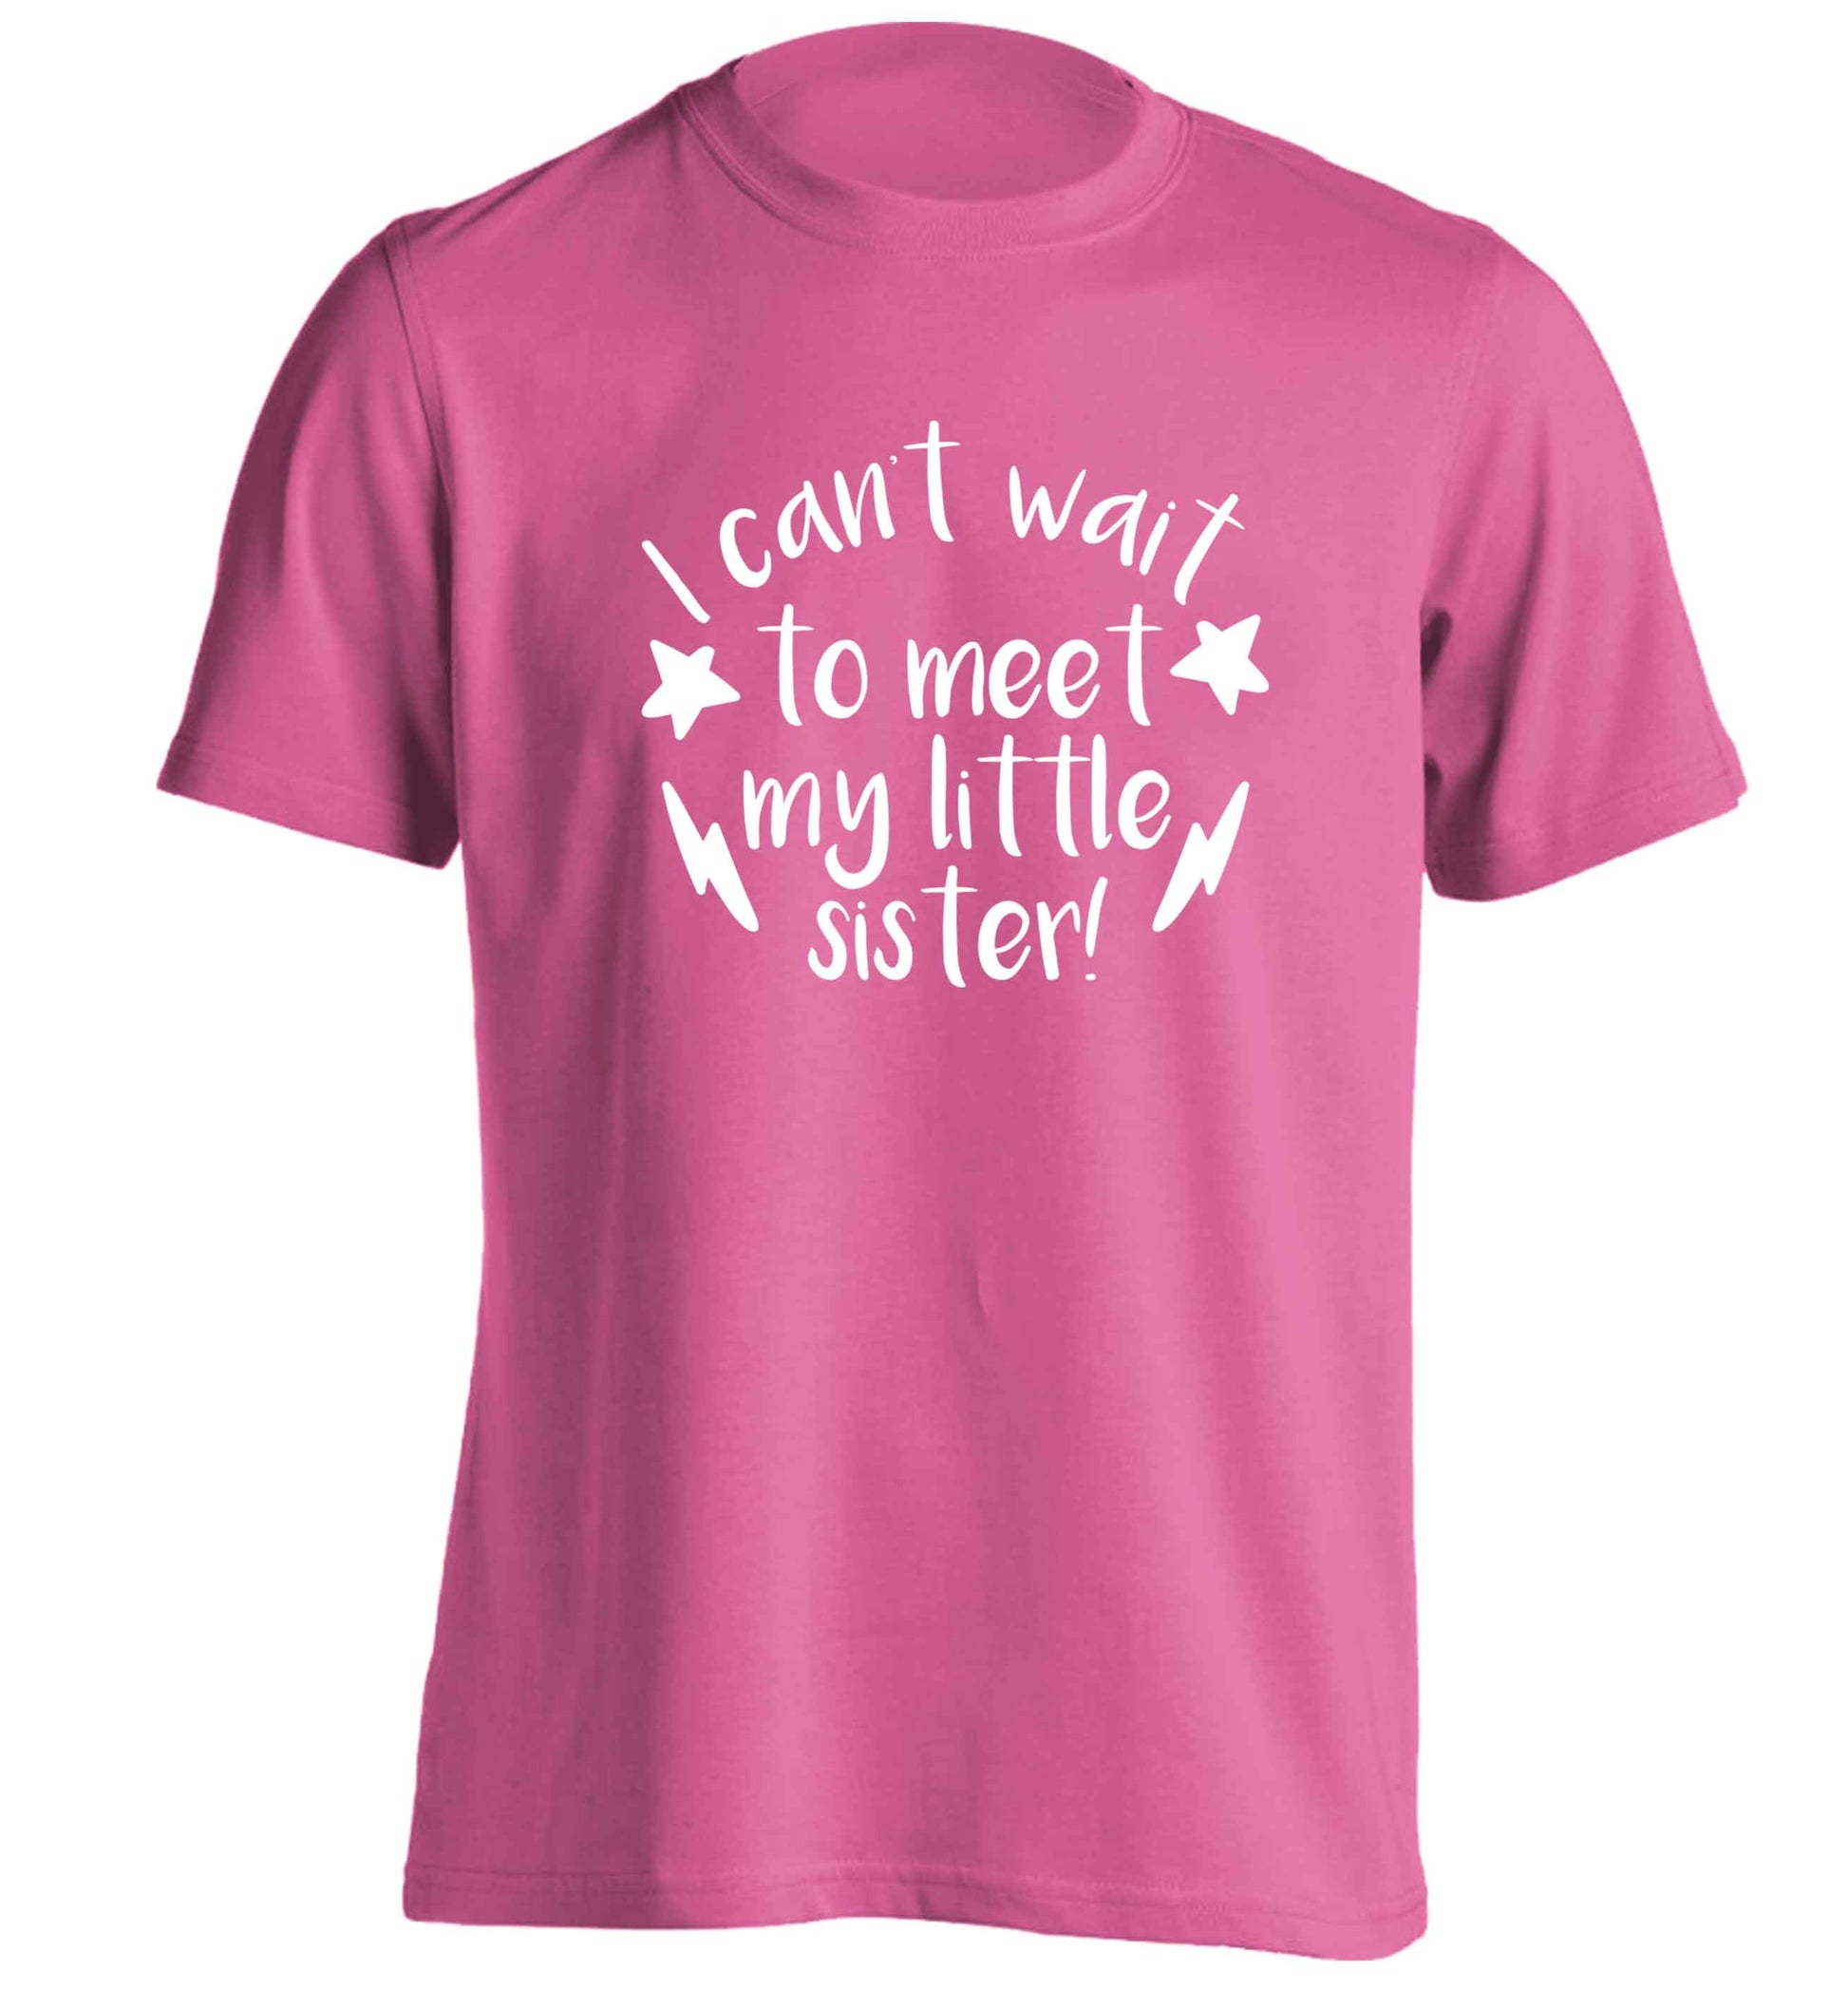 Something special growing inside it's my little sister I can't wait to say hi! adults unisex pink Tshirt 2XL